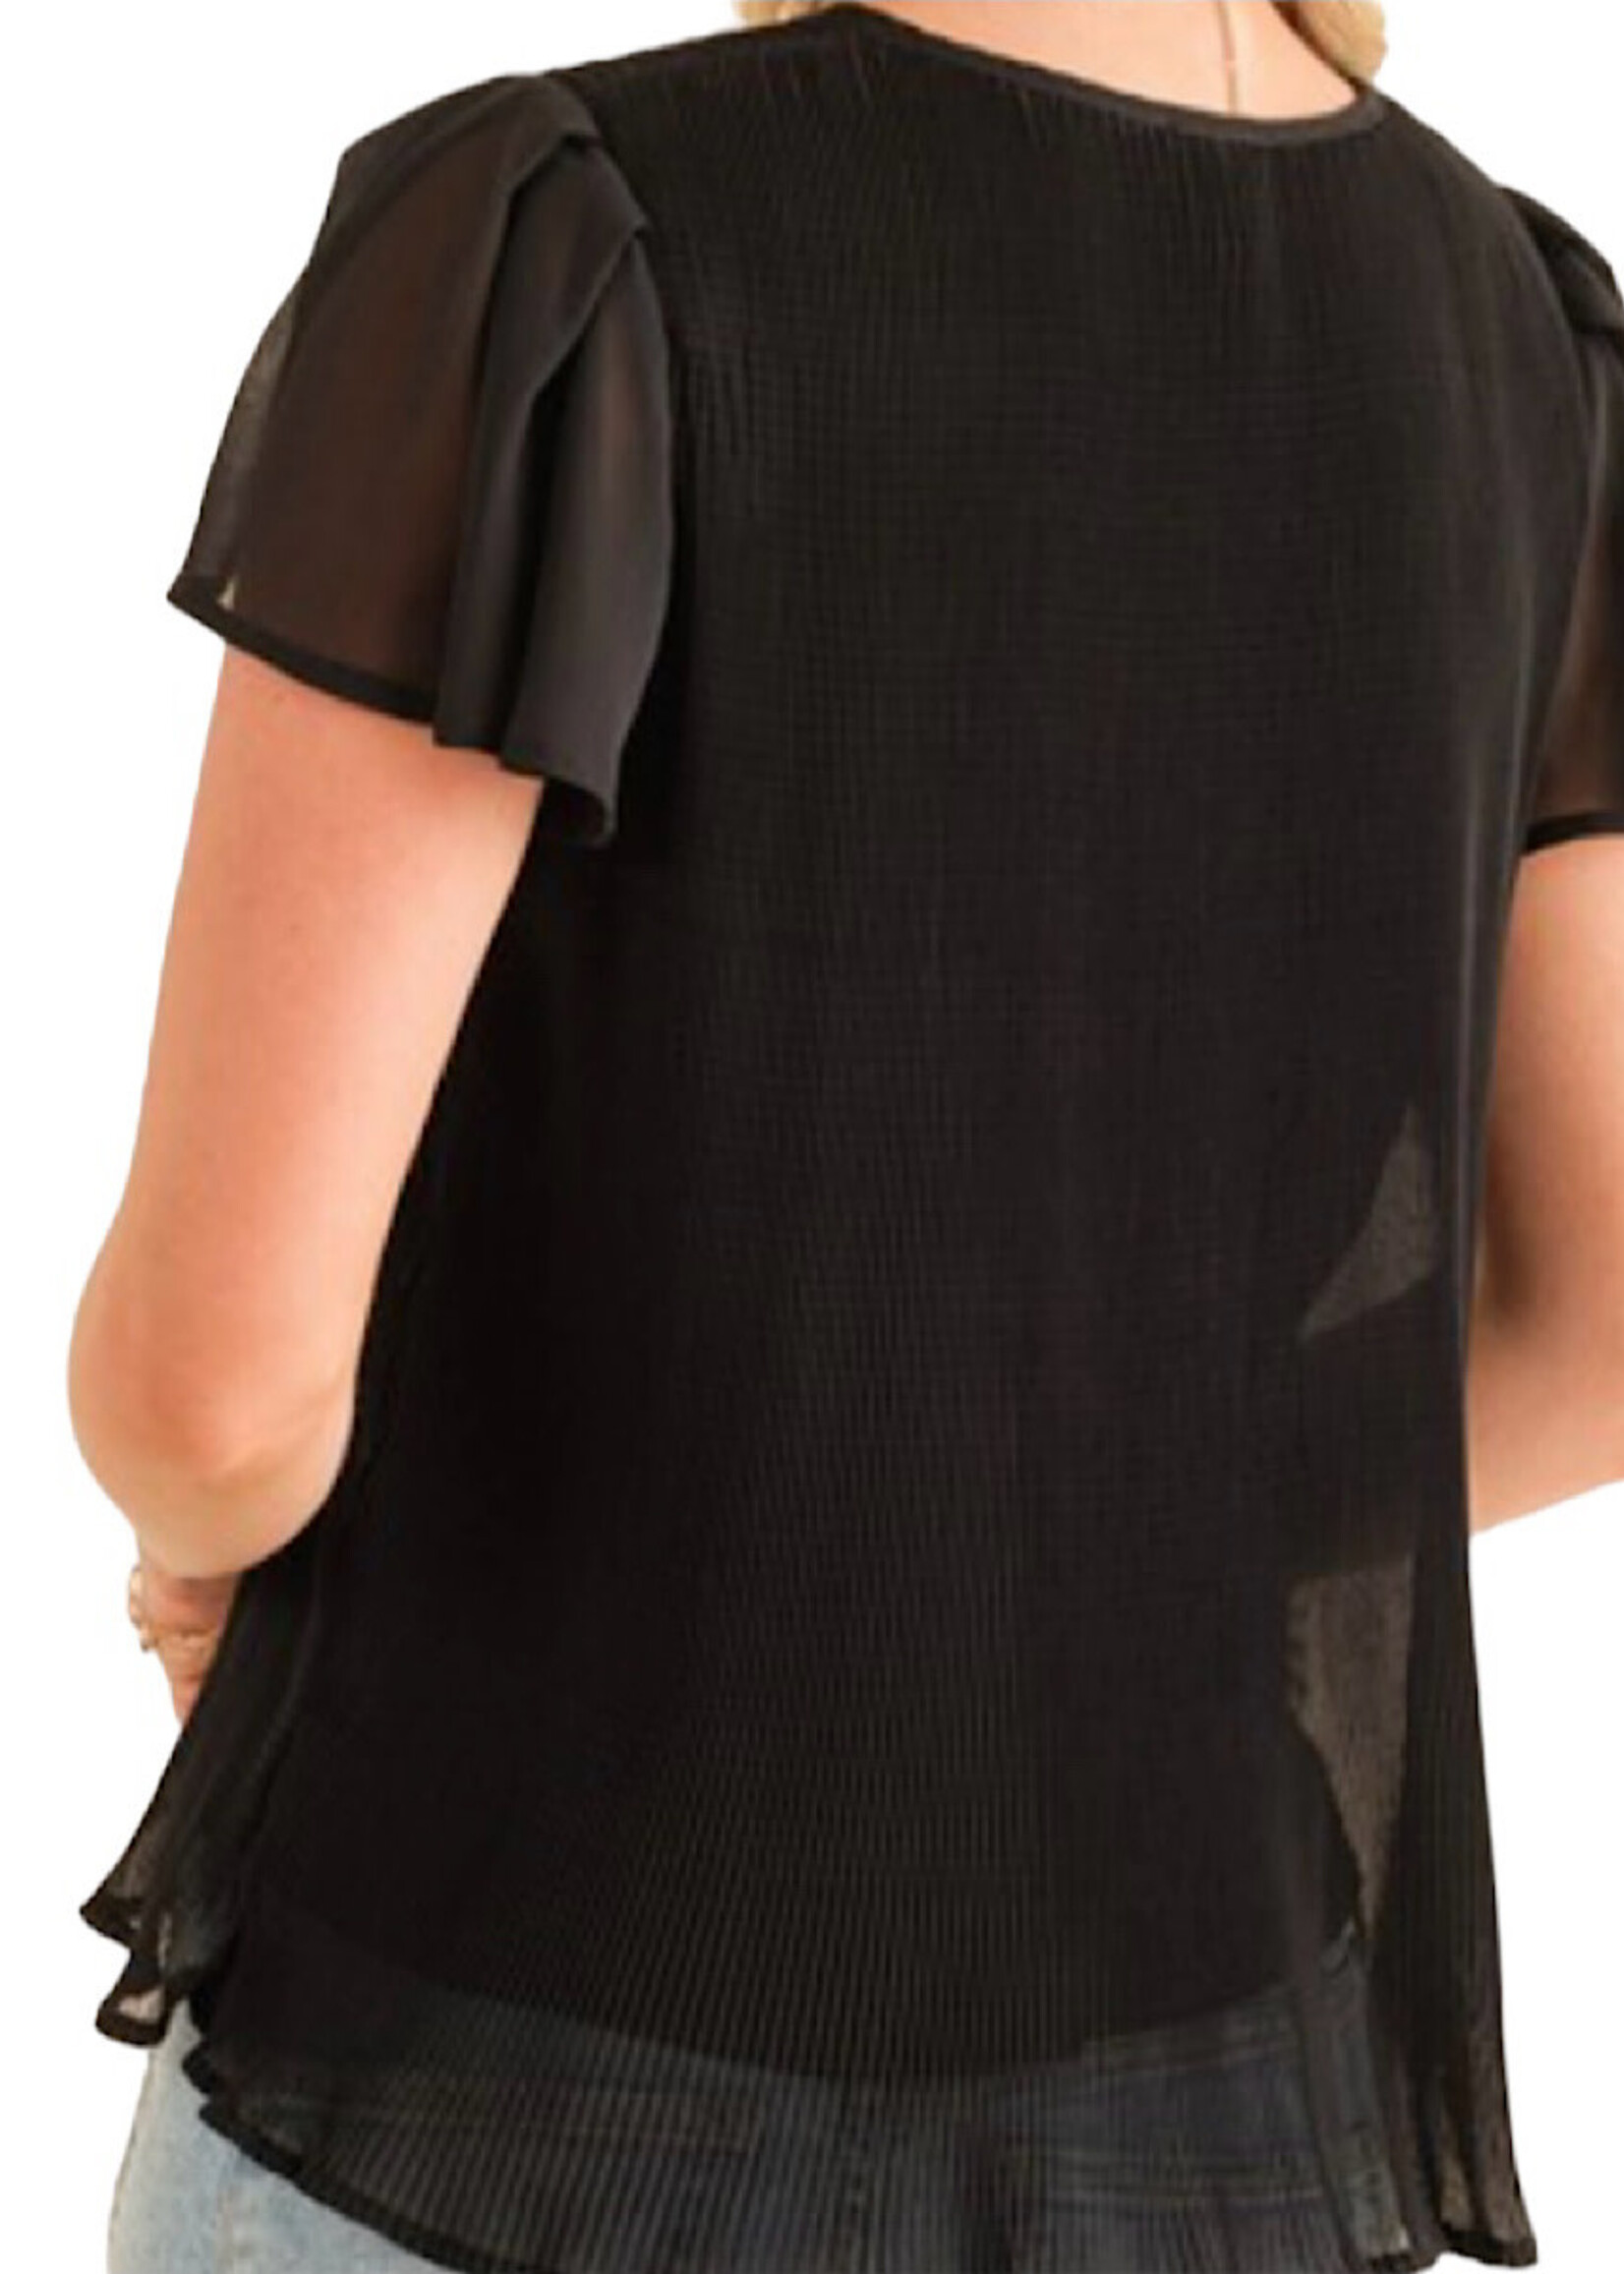 Black Accordion Pleat Chiffon Top with Contrast Sleeves